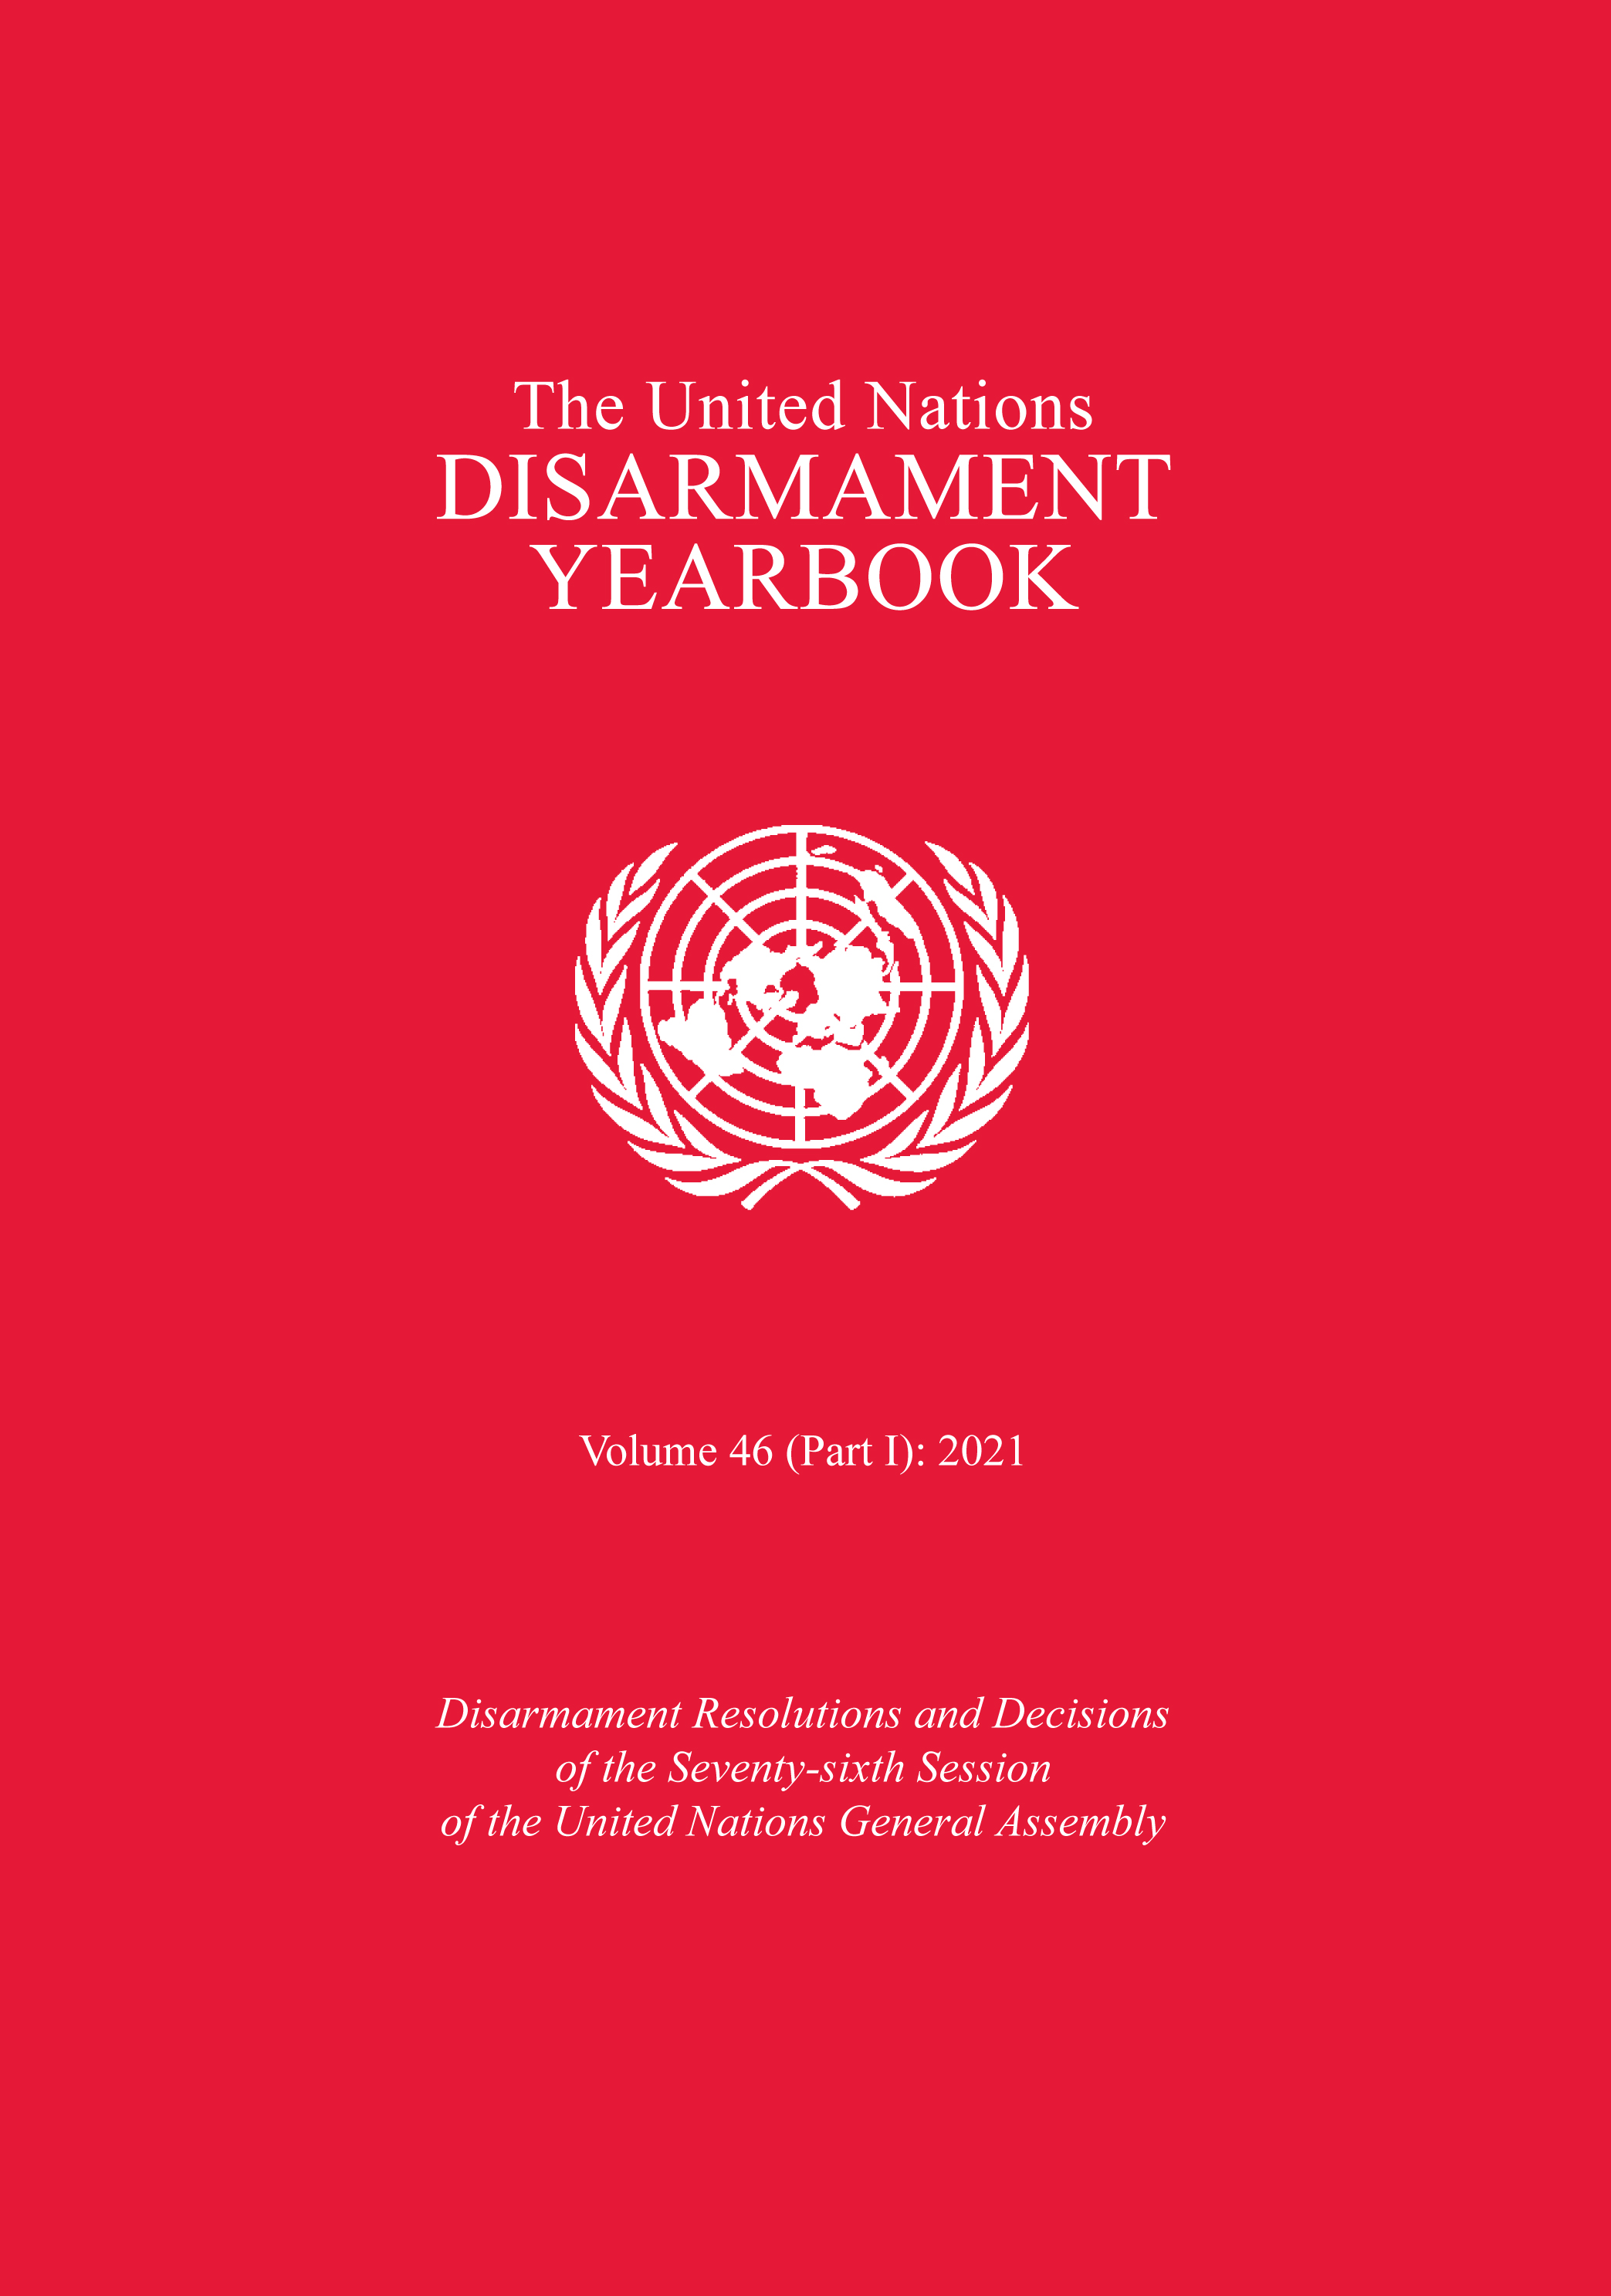 image of United Nations Disarmament Yearbook 2021: Part I